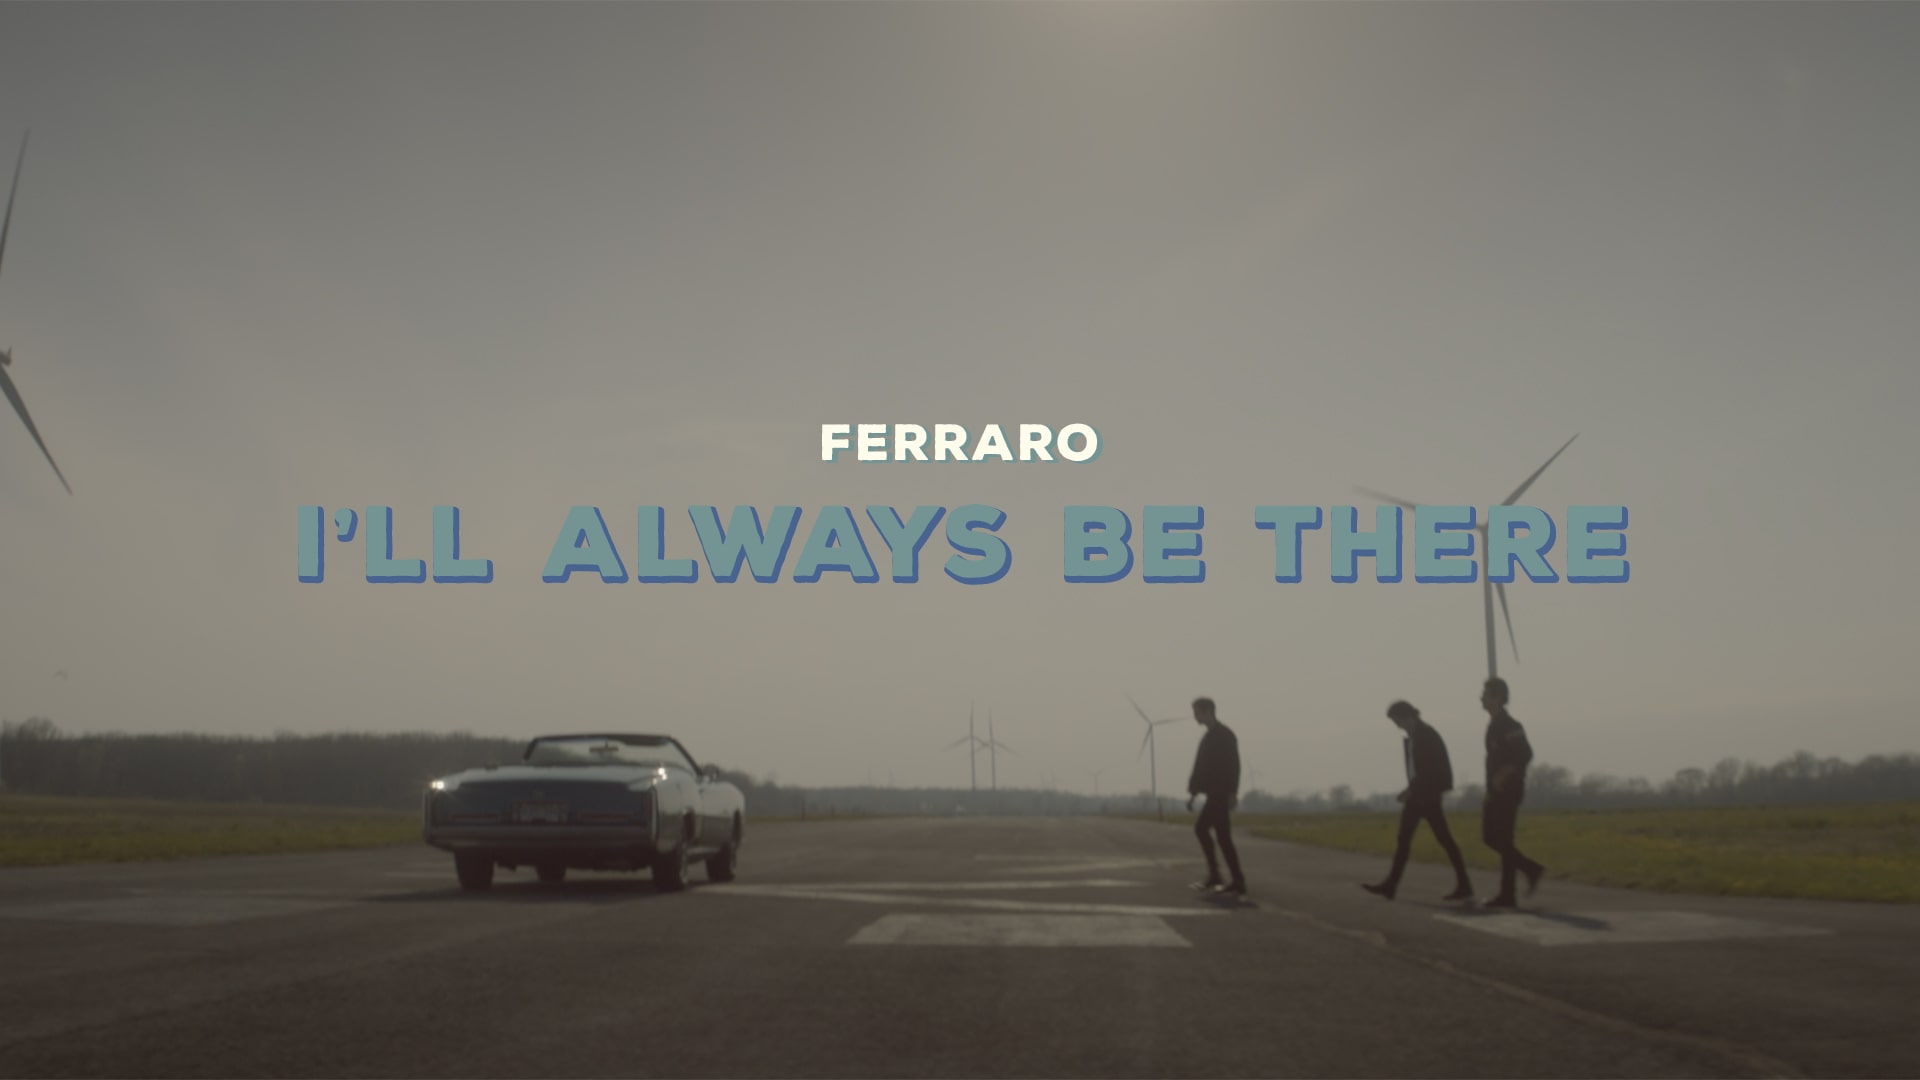 I'll always be there video thumbnail